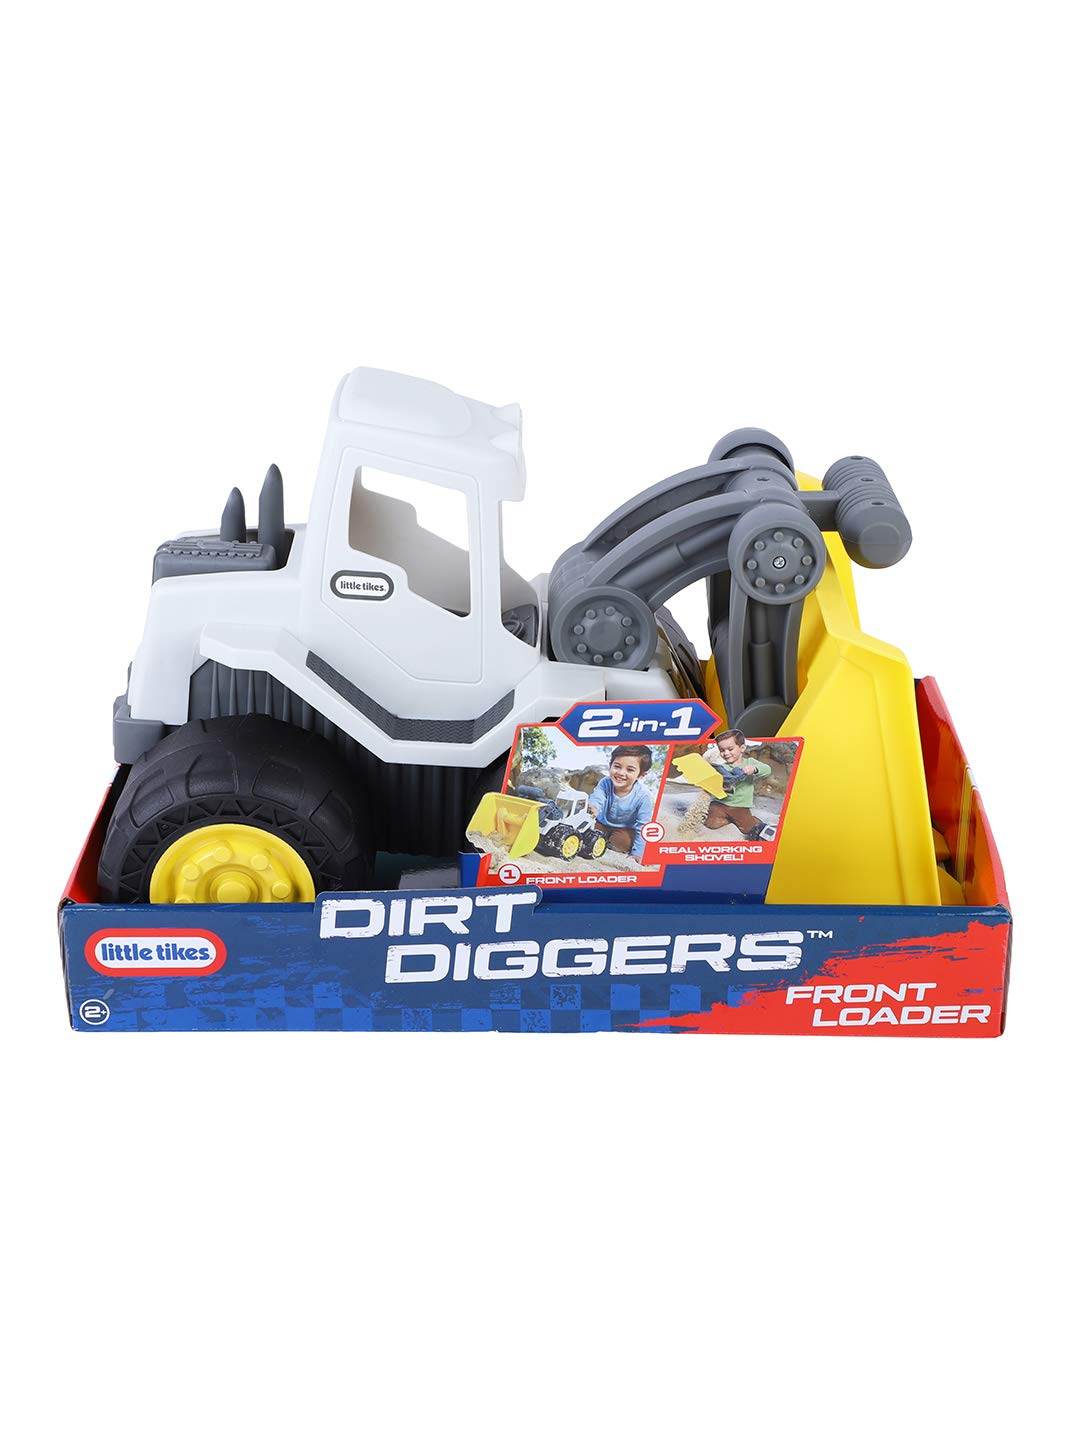 Little Tikes Dirt Diggers 2in1 Front Loader with Removeable JCB